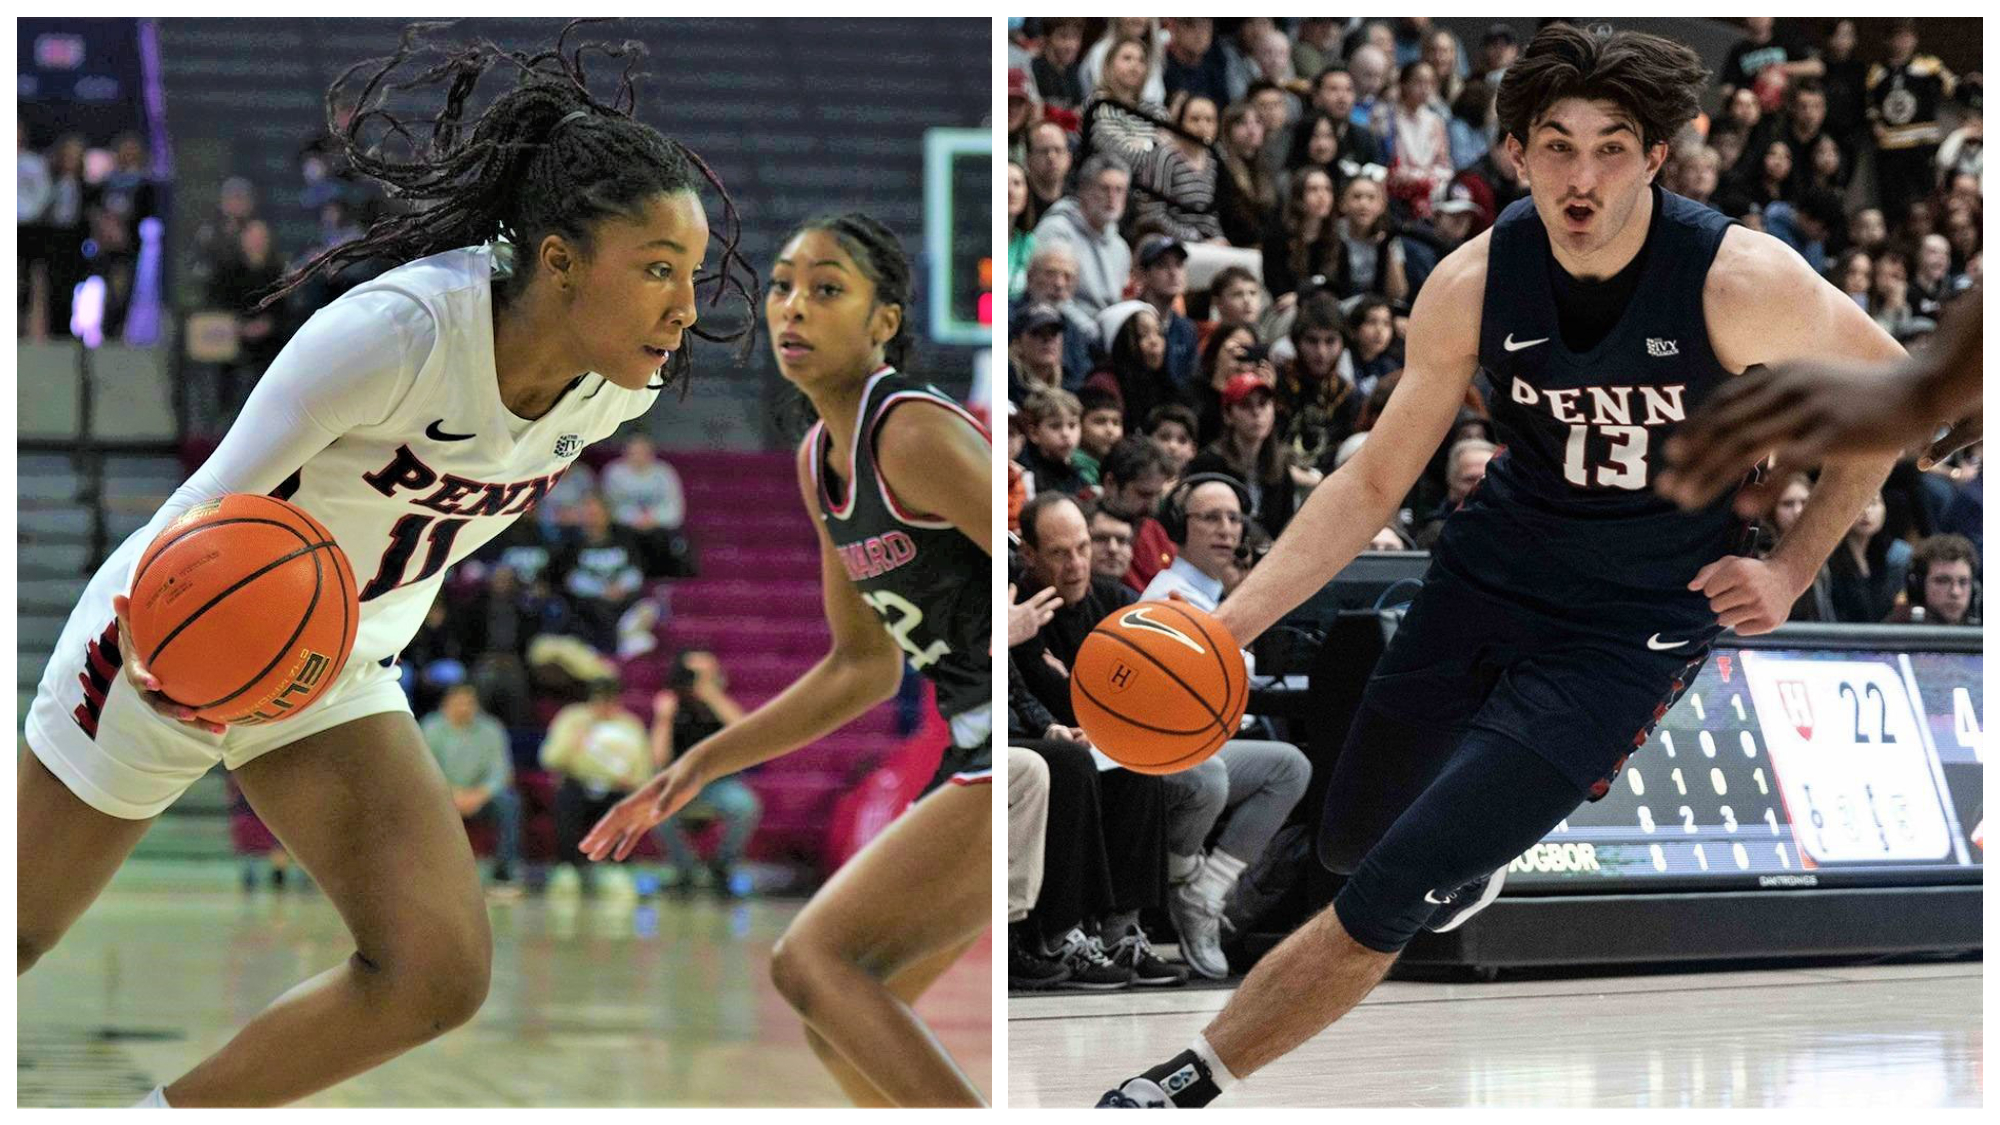 Two basketball players driving the basketball in a game: Sawyer against Harvard at home and Spinoso against Harvard in Massachusetts.